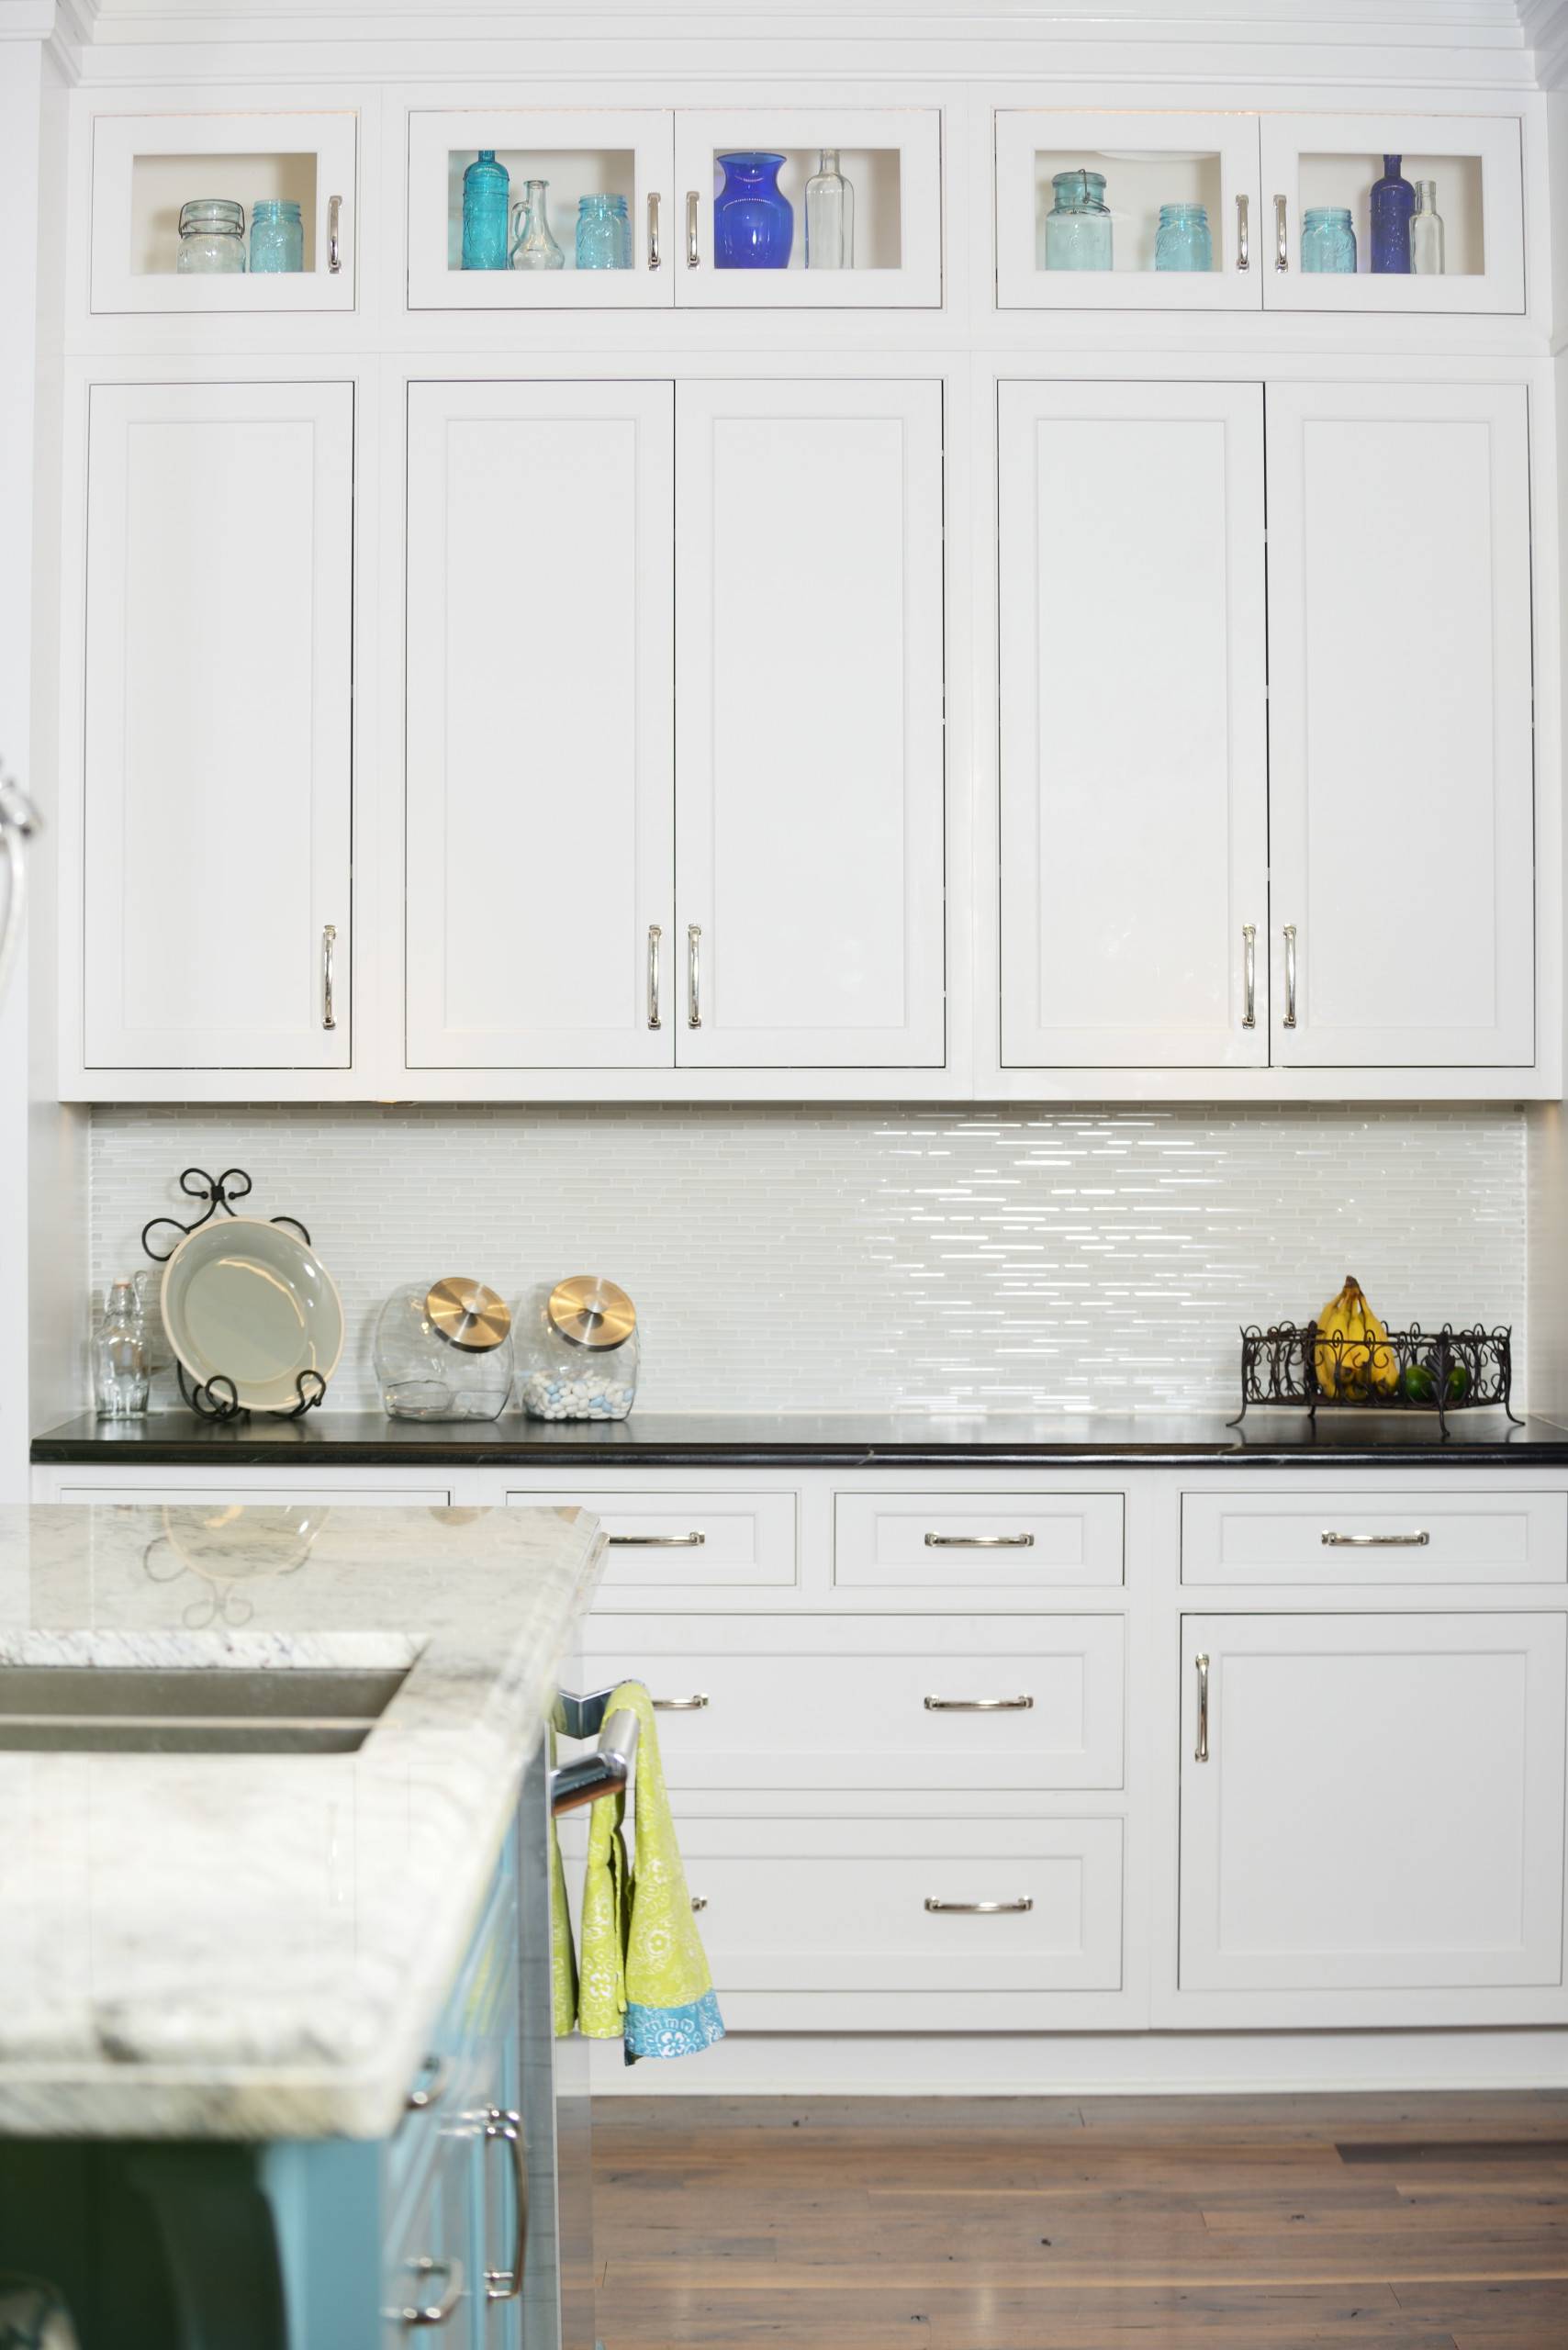 Traditional style and white cabinets (from Houzz)